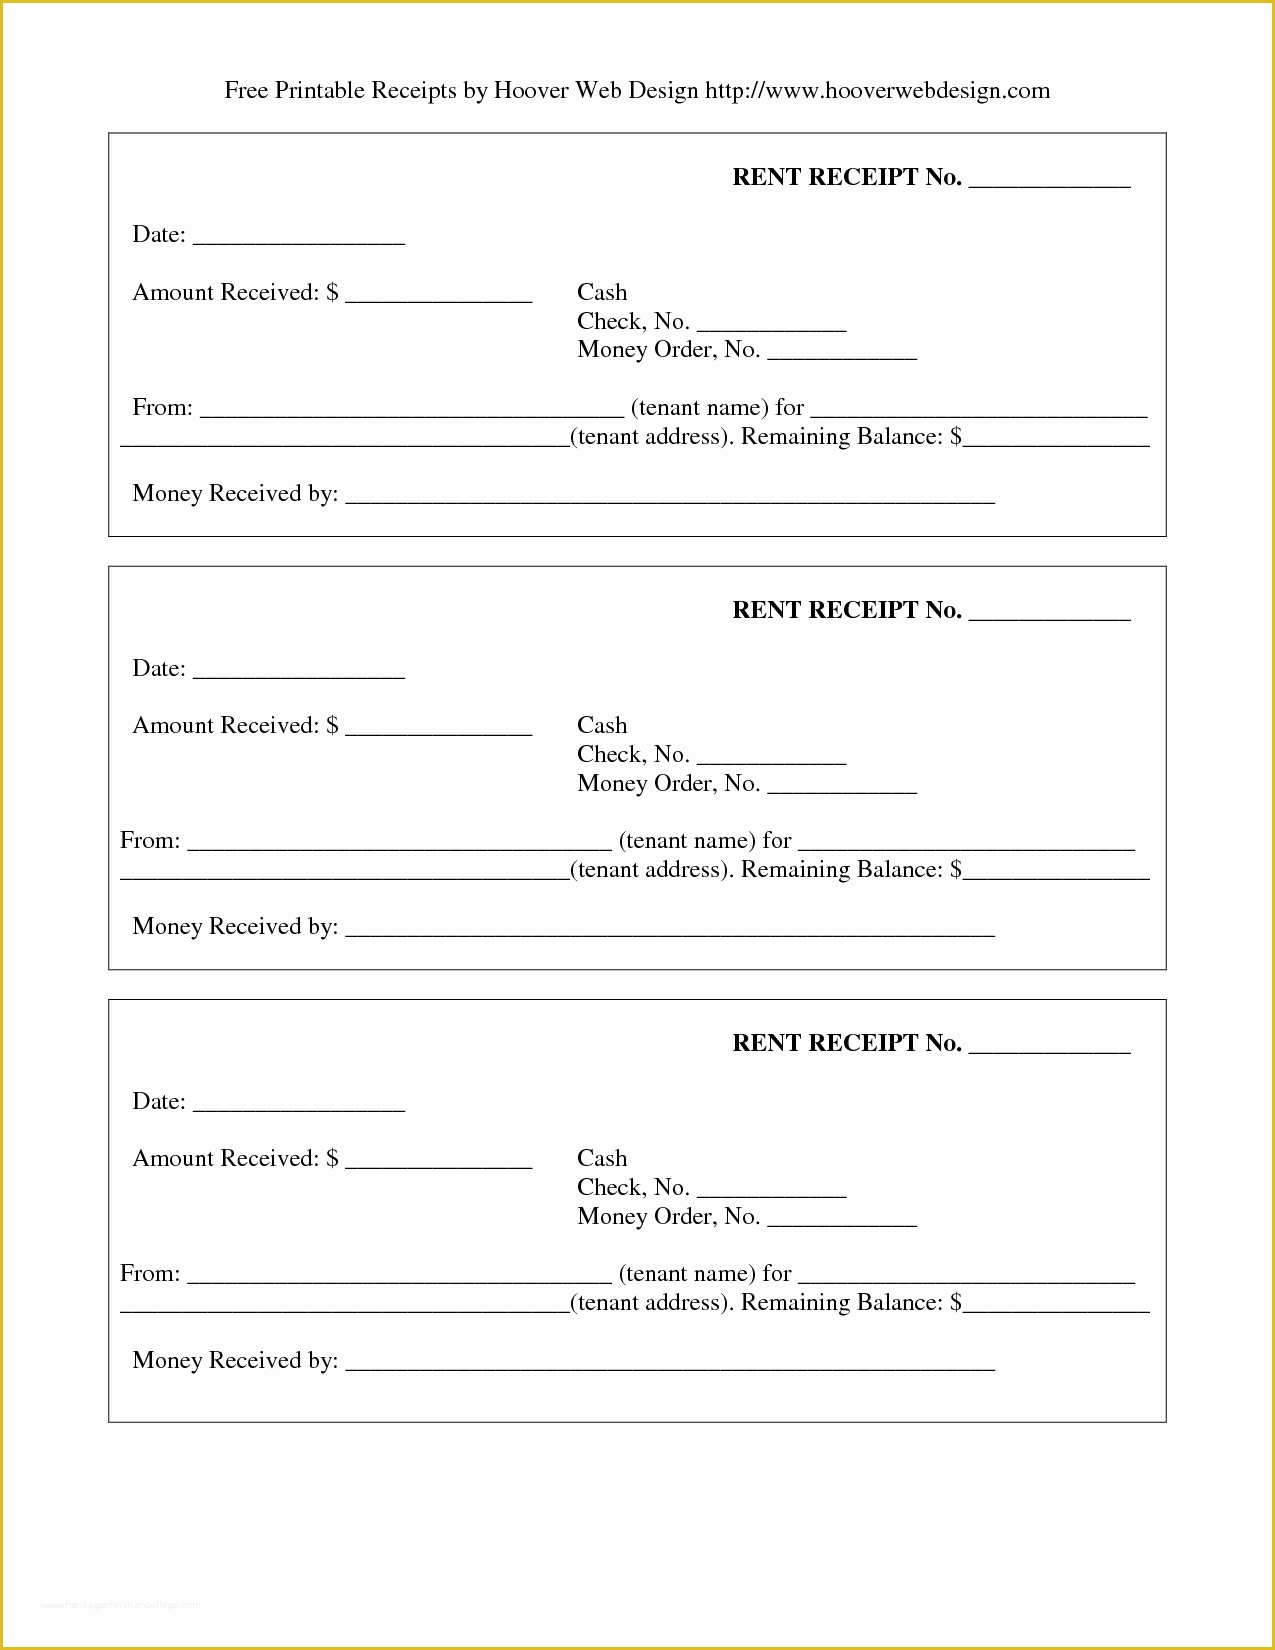 Free Printable Receipt Template Of 11 Best Of Free Printable Payment Receipt form